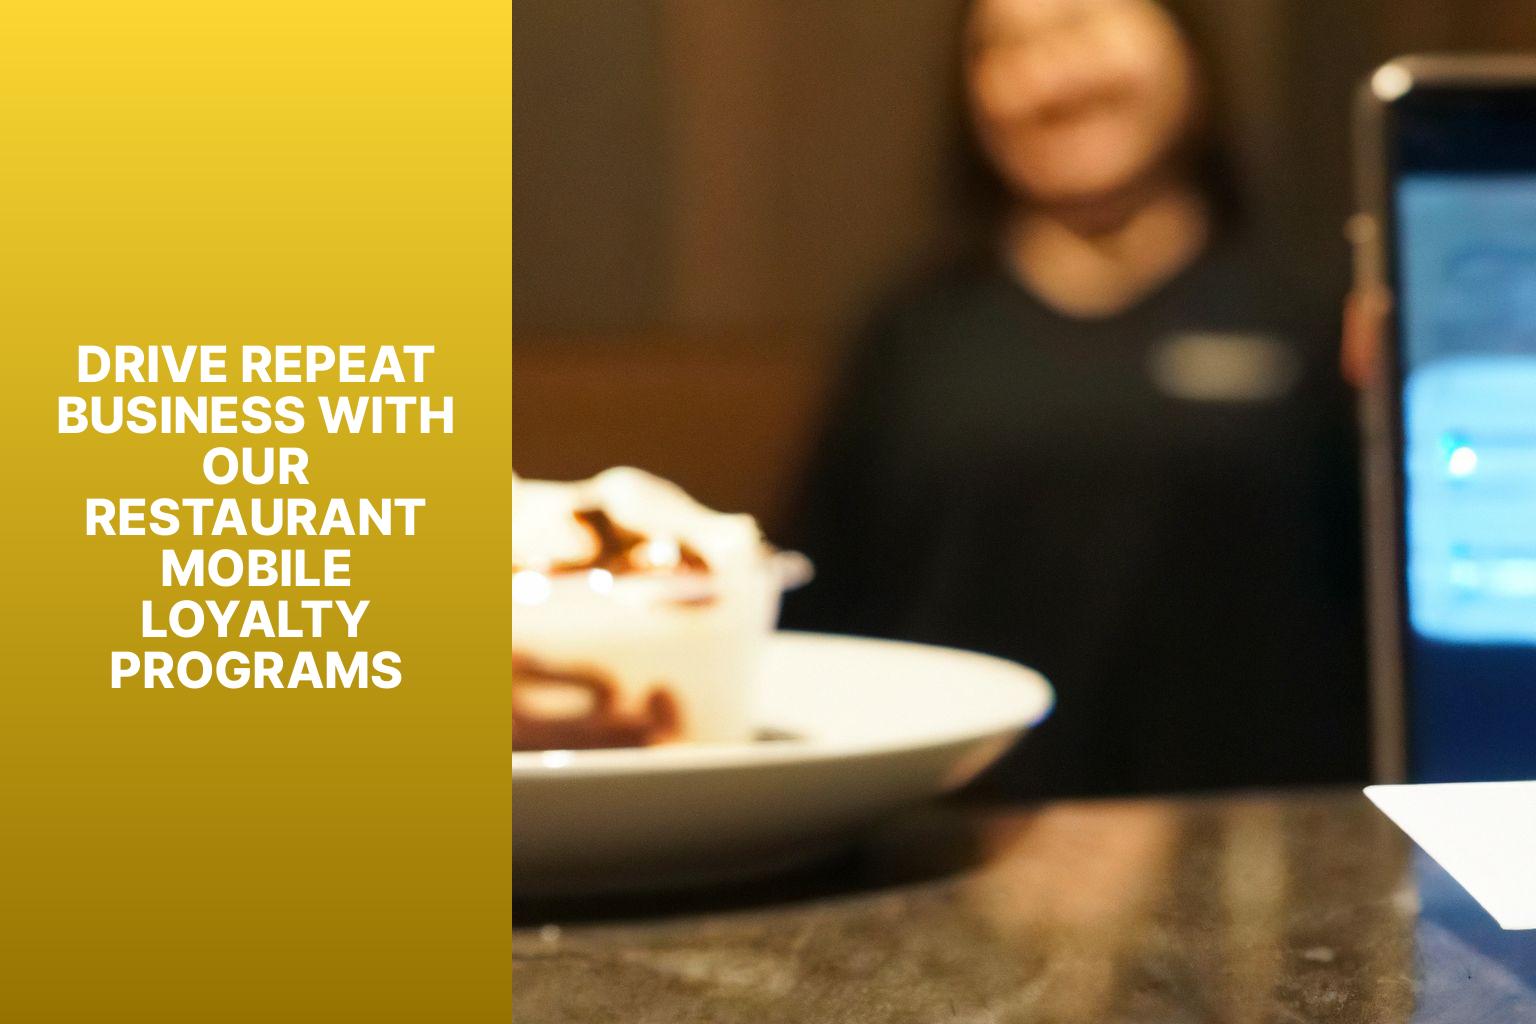 Drive Repeat Business with Our Restaurant Mobile Loyalty Programs